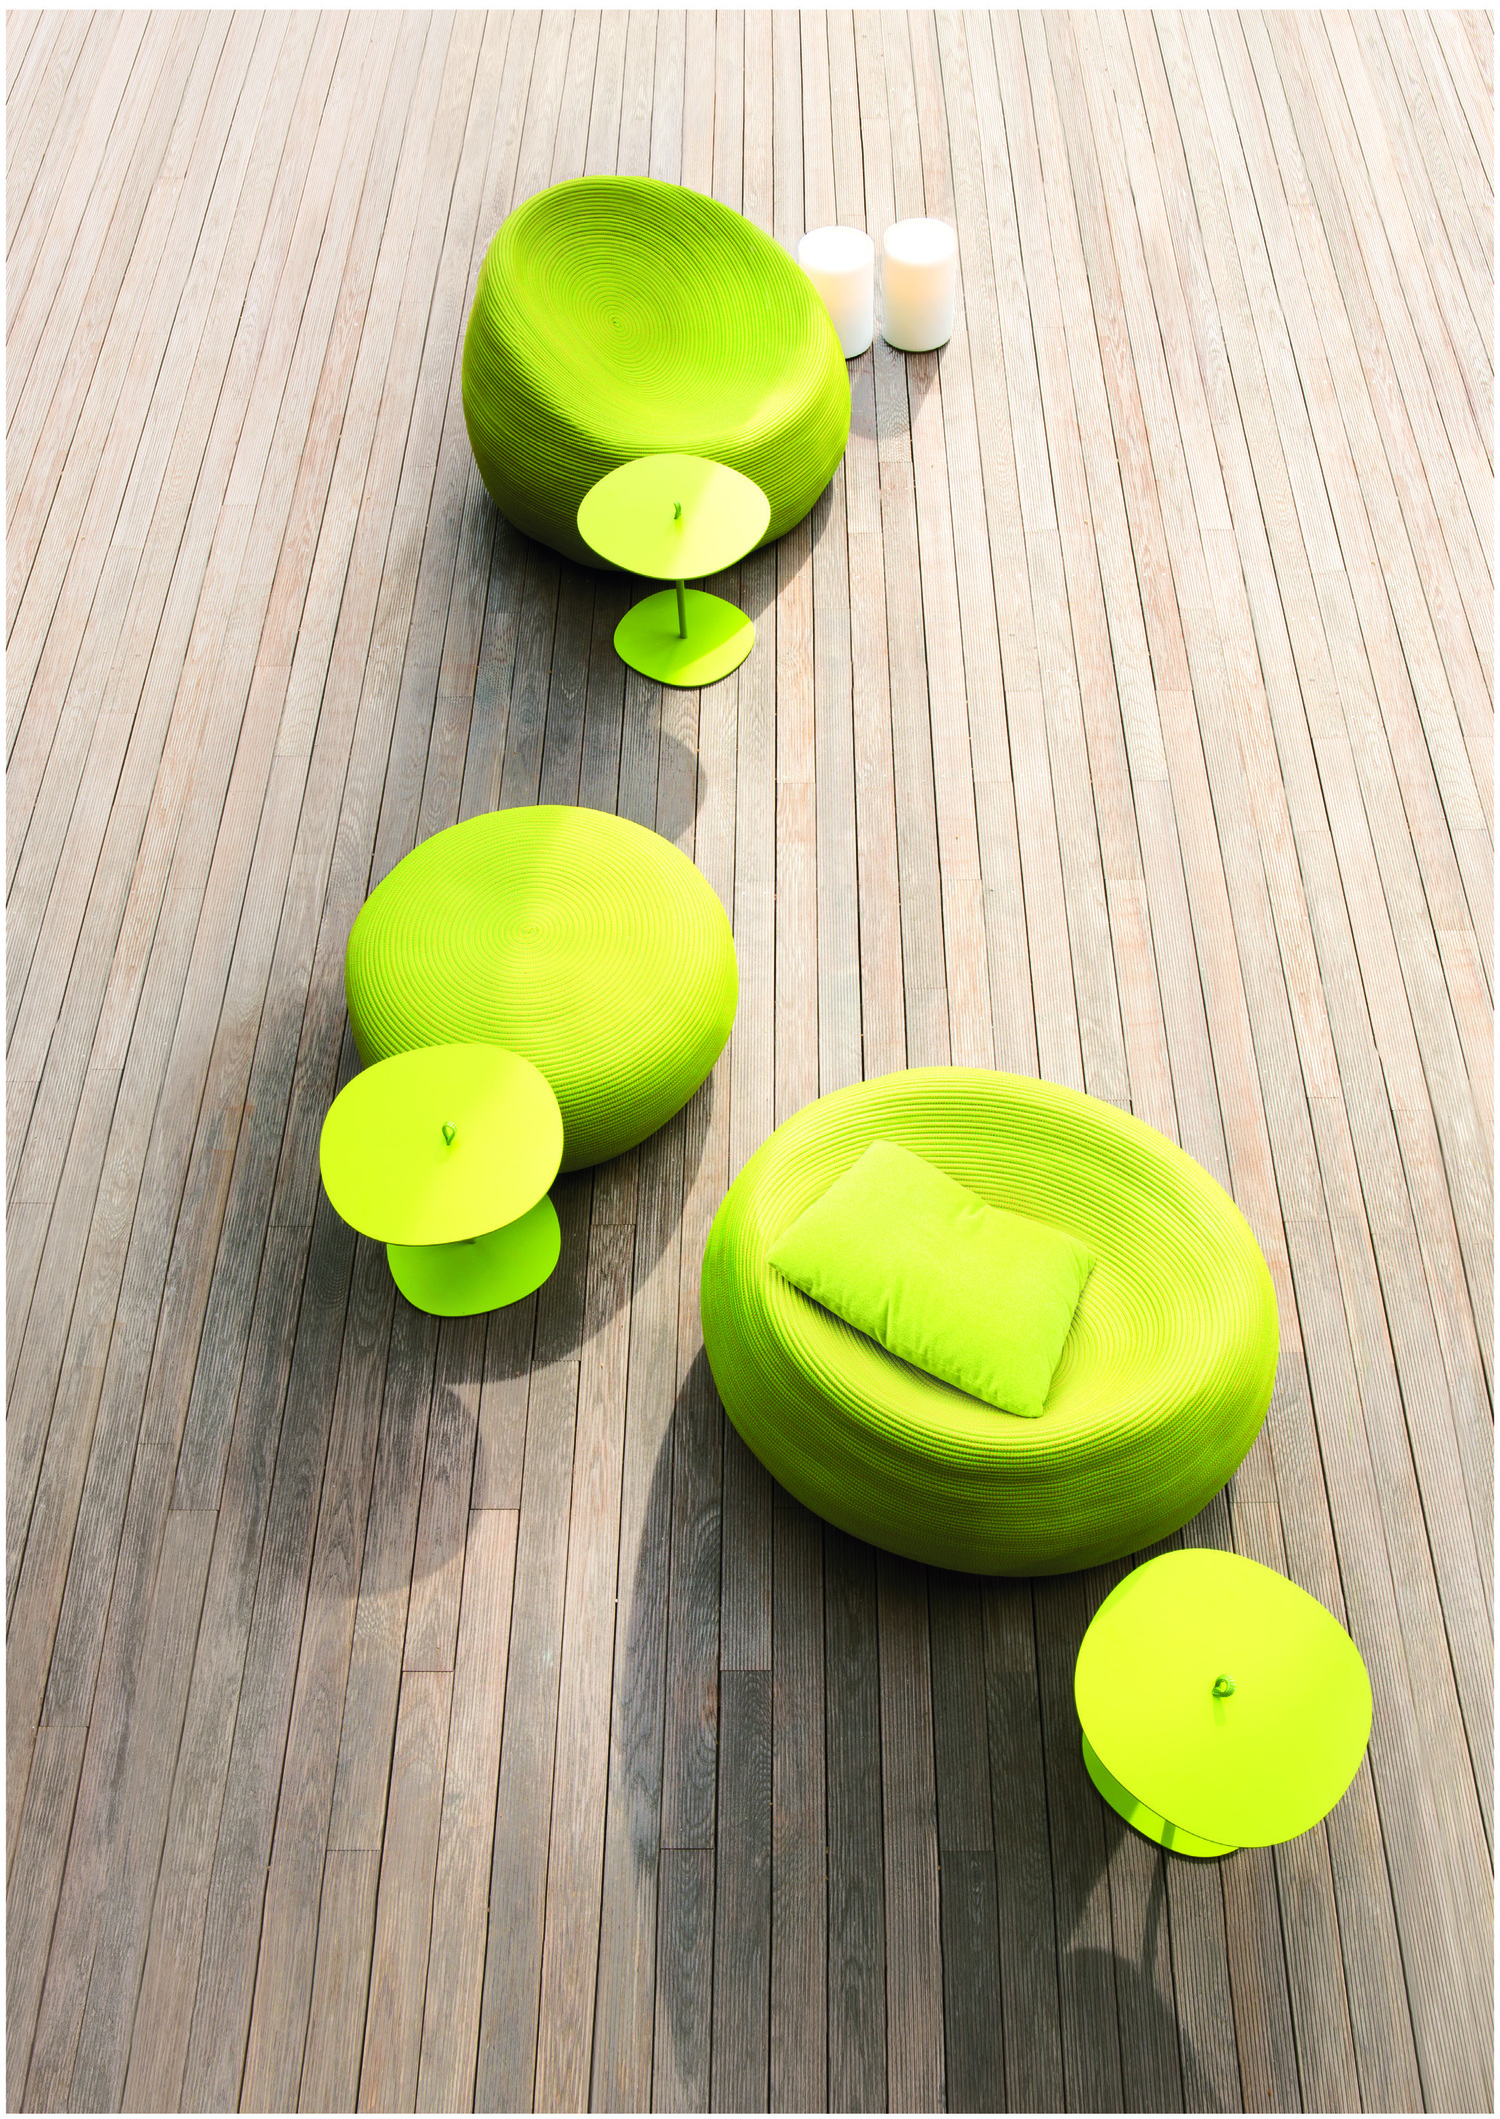 Poufs available in different shapes and dimensions. The padding is made of polypropylene microspheres contained in a fixed, three-dimensional polyester fabric cover. The upholstery cover is removable and sewn with a spiral-like pattern using Rope cord, in solid or in two-color combinations, or Twiggy cord in mélange colors, both Paola Lenti’s exclusive materials conceived for the outdoors. © PAOLA LENTI SRL/SERGIO CHIMENTI